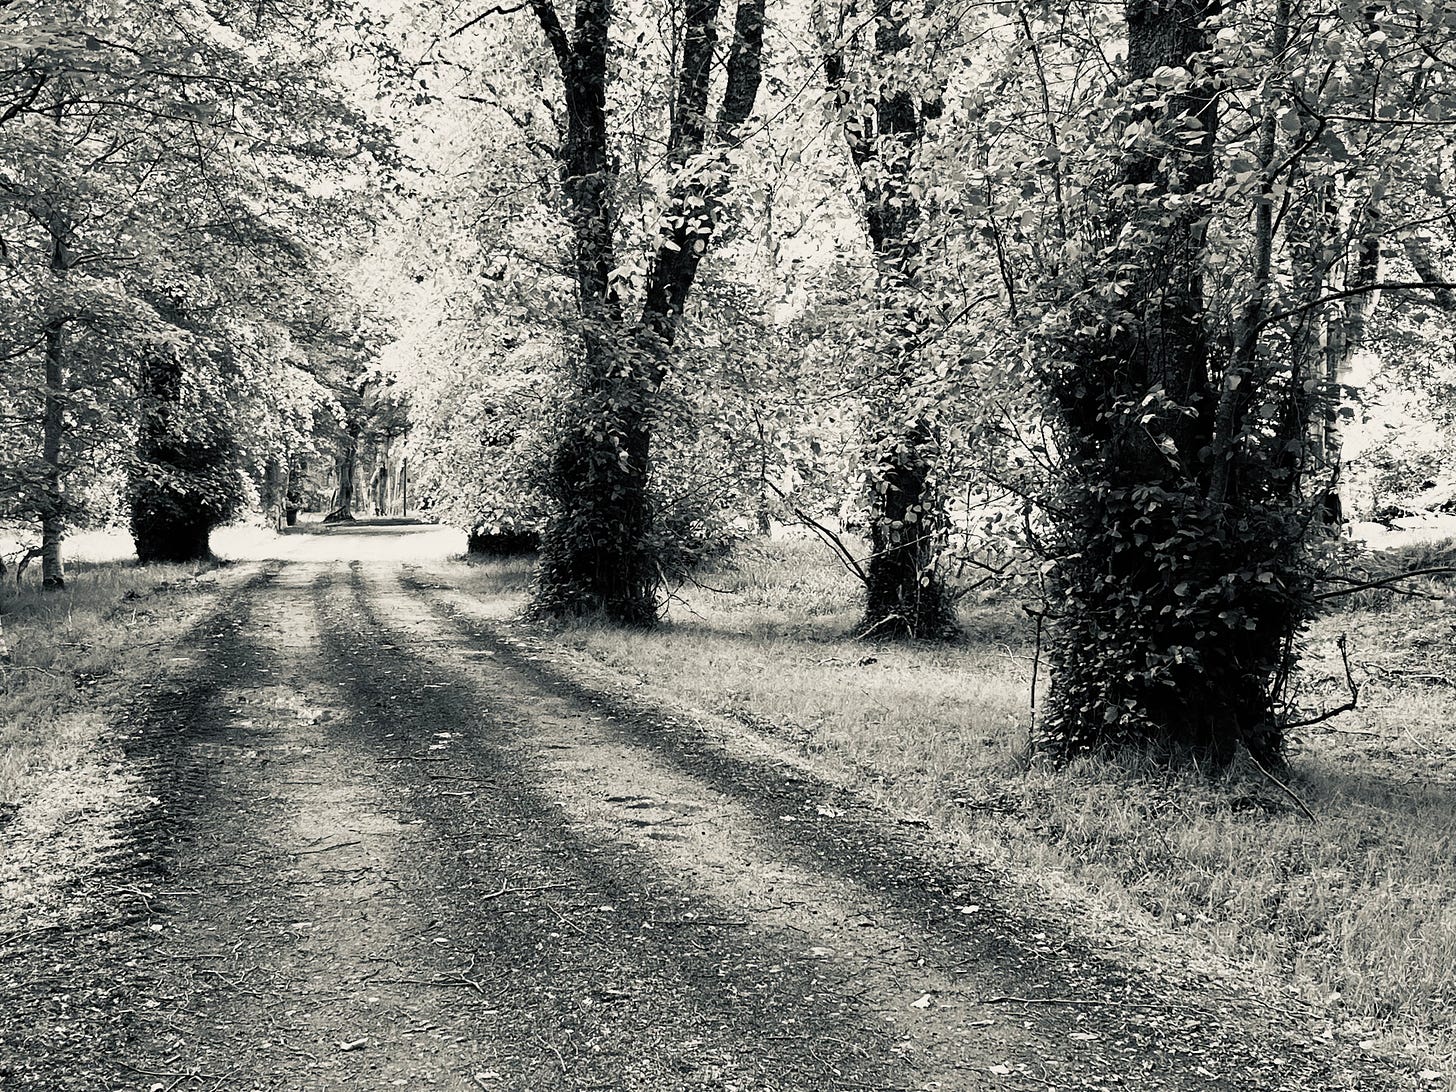 Mature lime trees line an old carriage drive; monochrome view